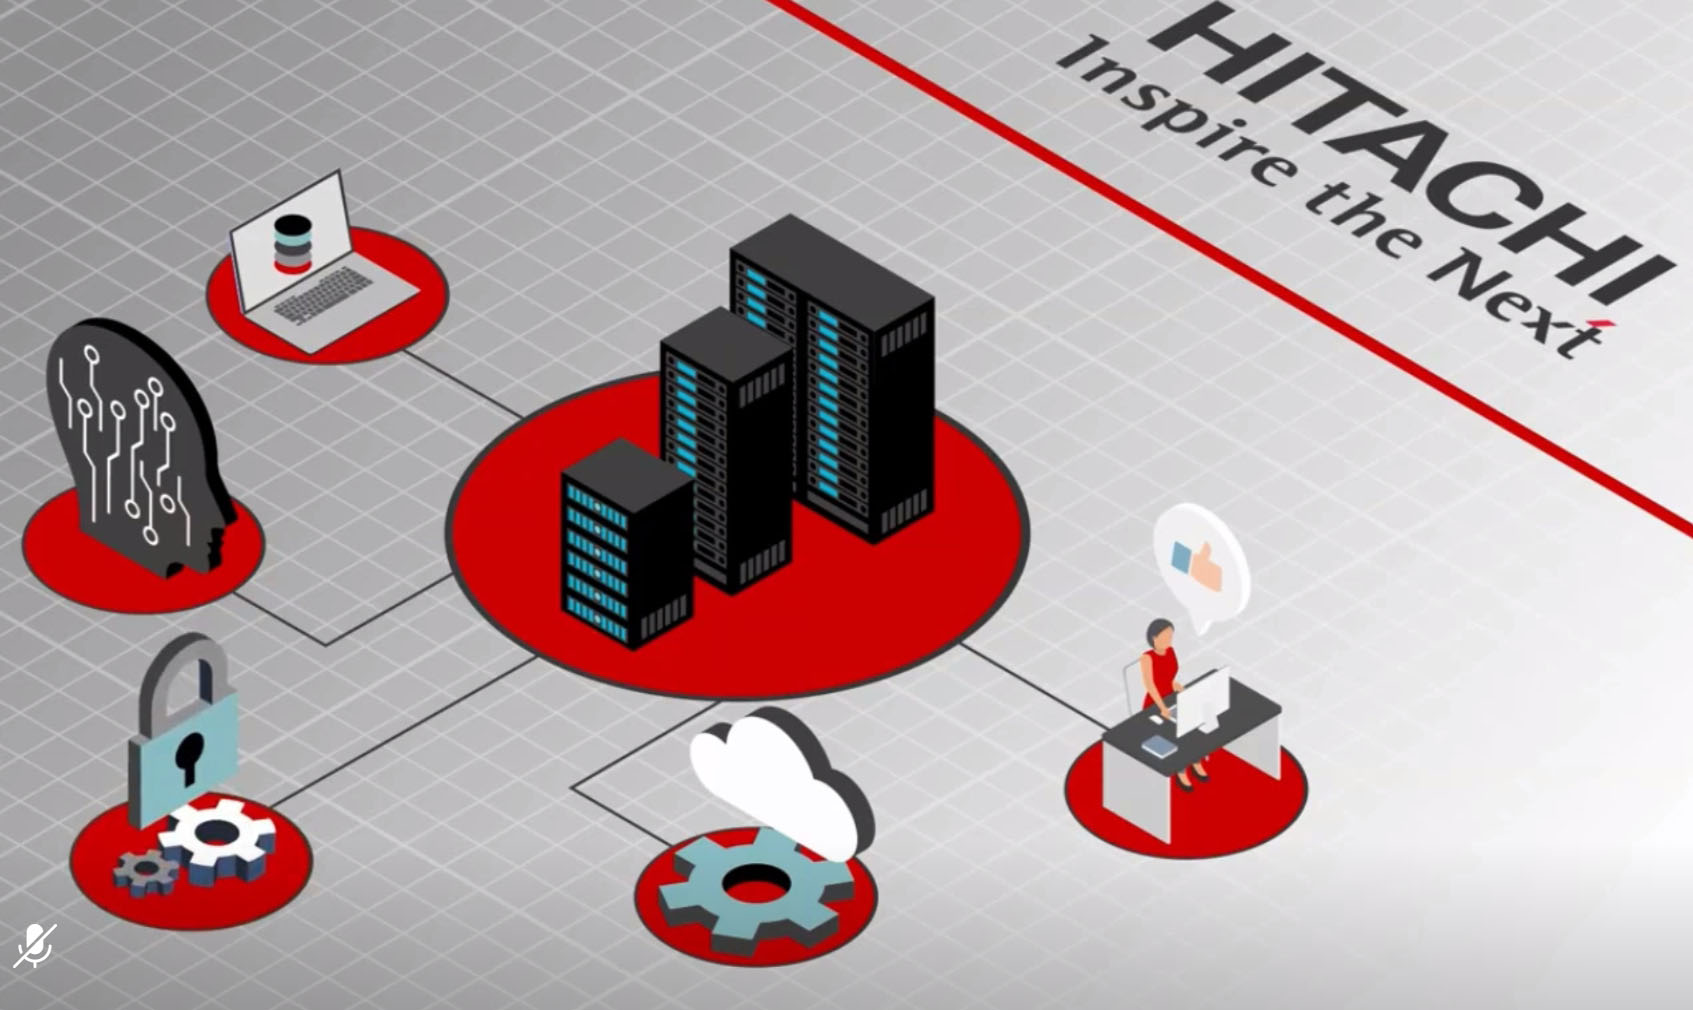 Delivering a simplified approach to Hyperconverged Infrastructure with Hitachi Vantara